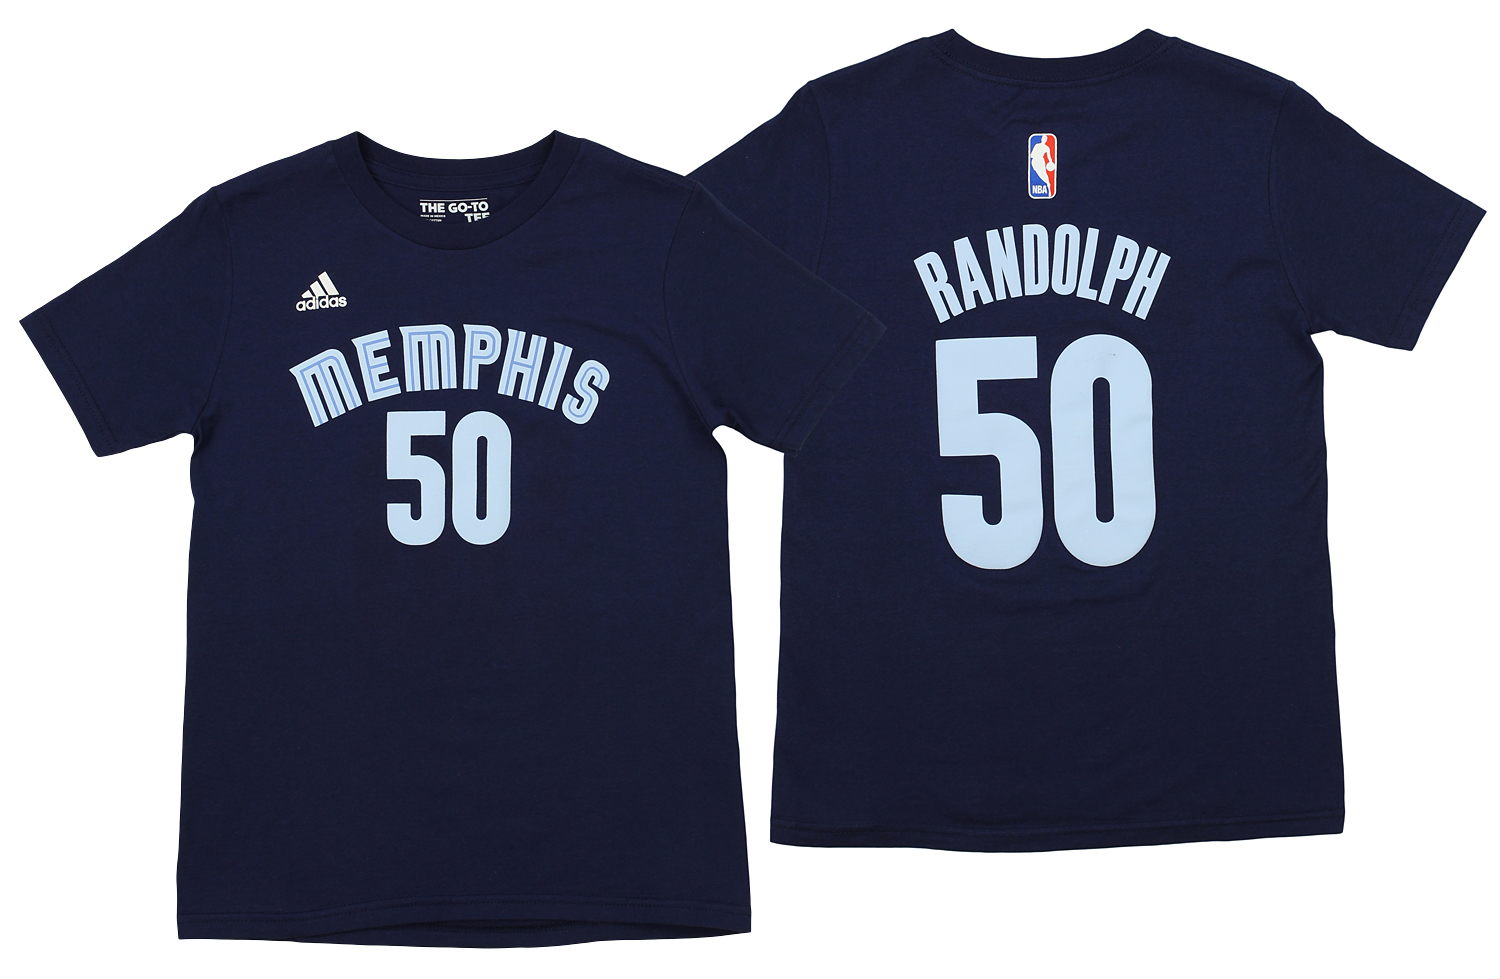 memphis grizzlies youth jersey